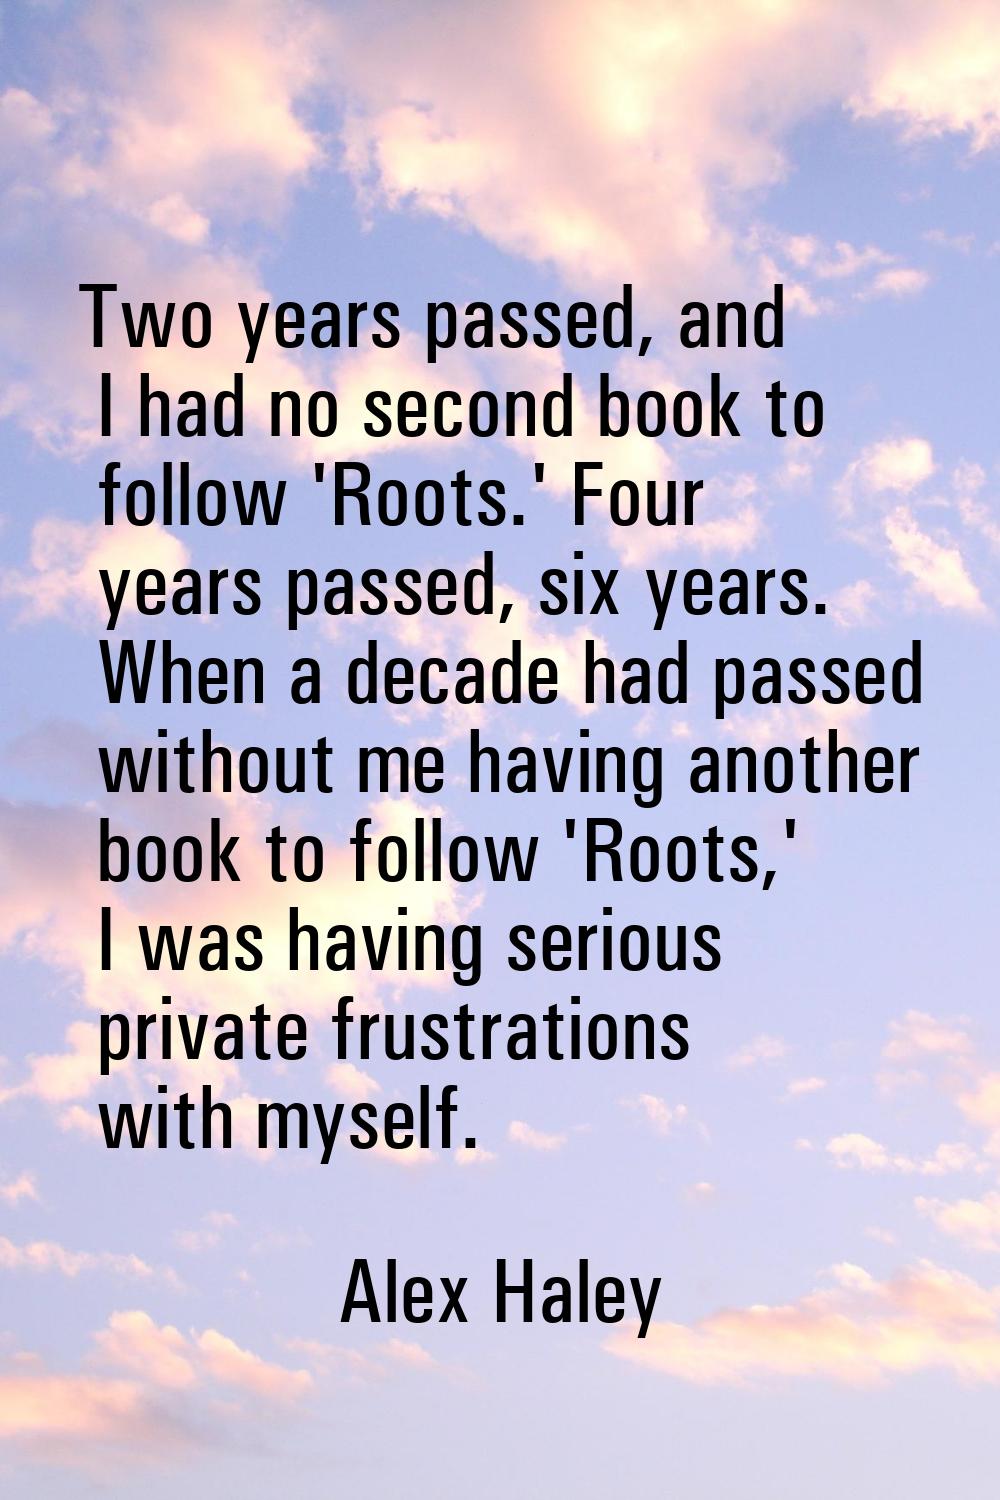 Two years passed, and I had no second book to follow 'Roots.' Four years passed, six years. When a 